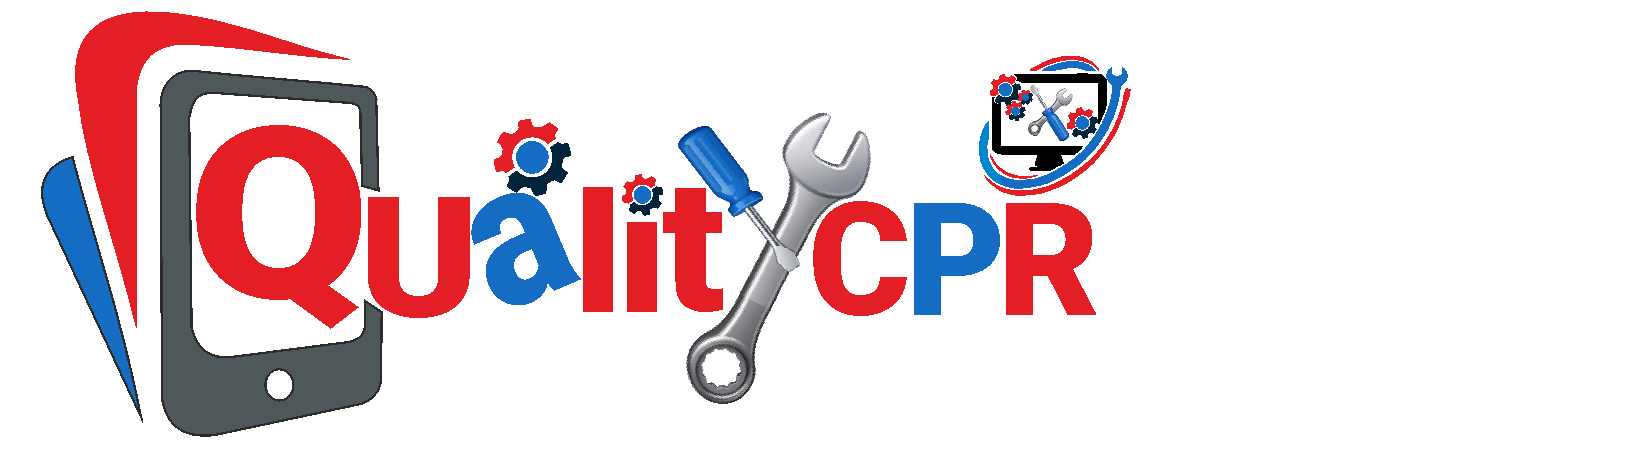 Quality CPR Cell Phone Repair | iPhone, iPad & Computer Repair Services